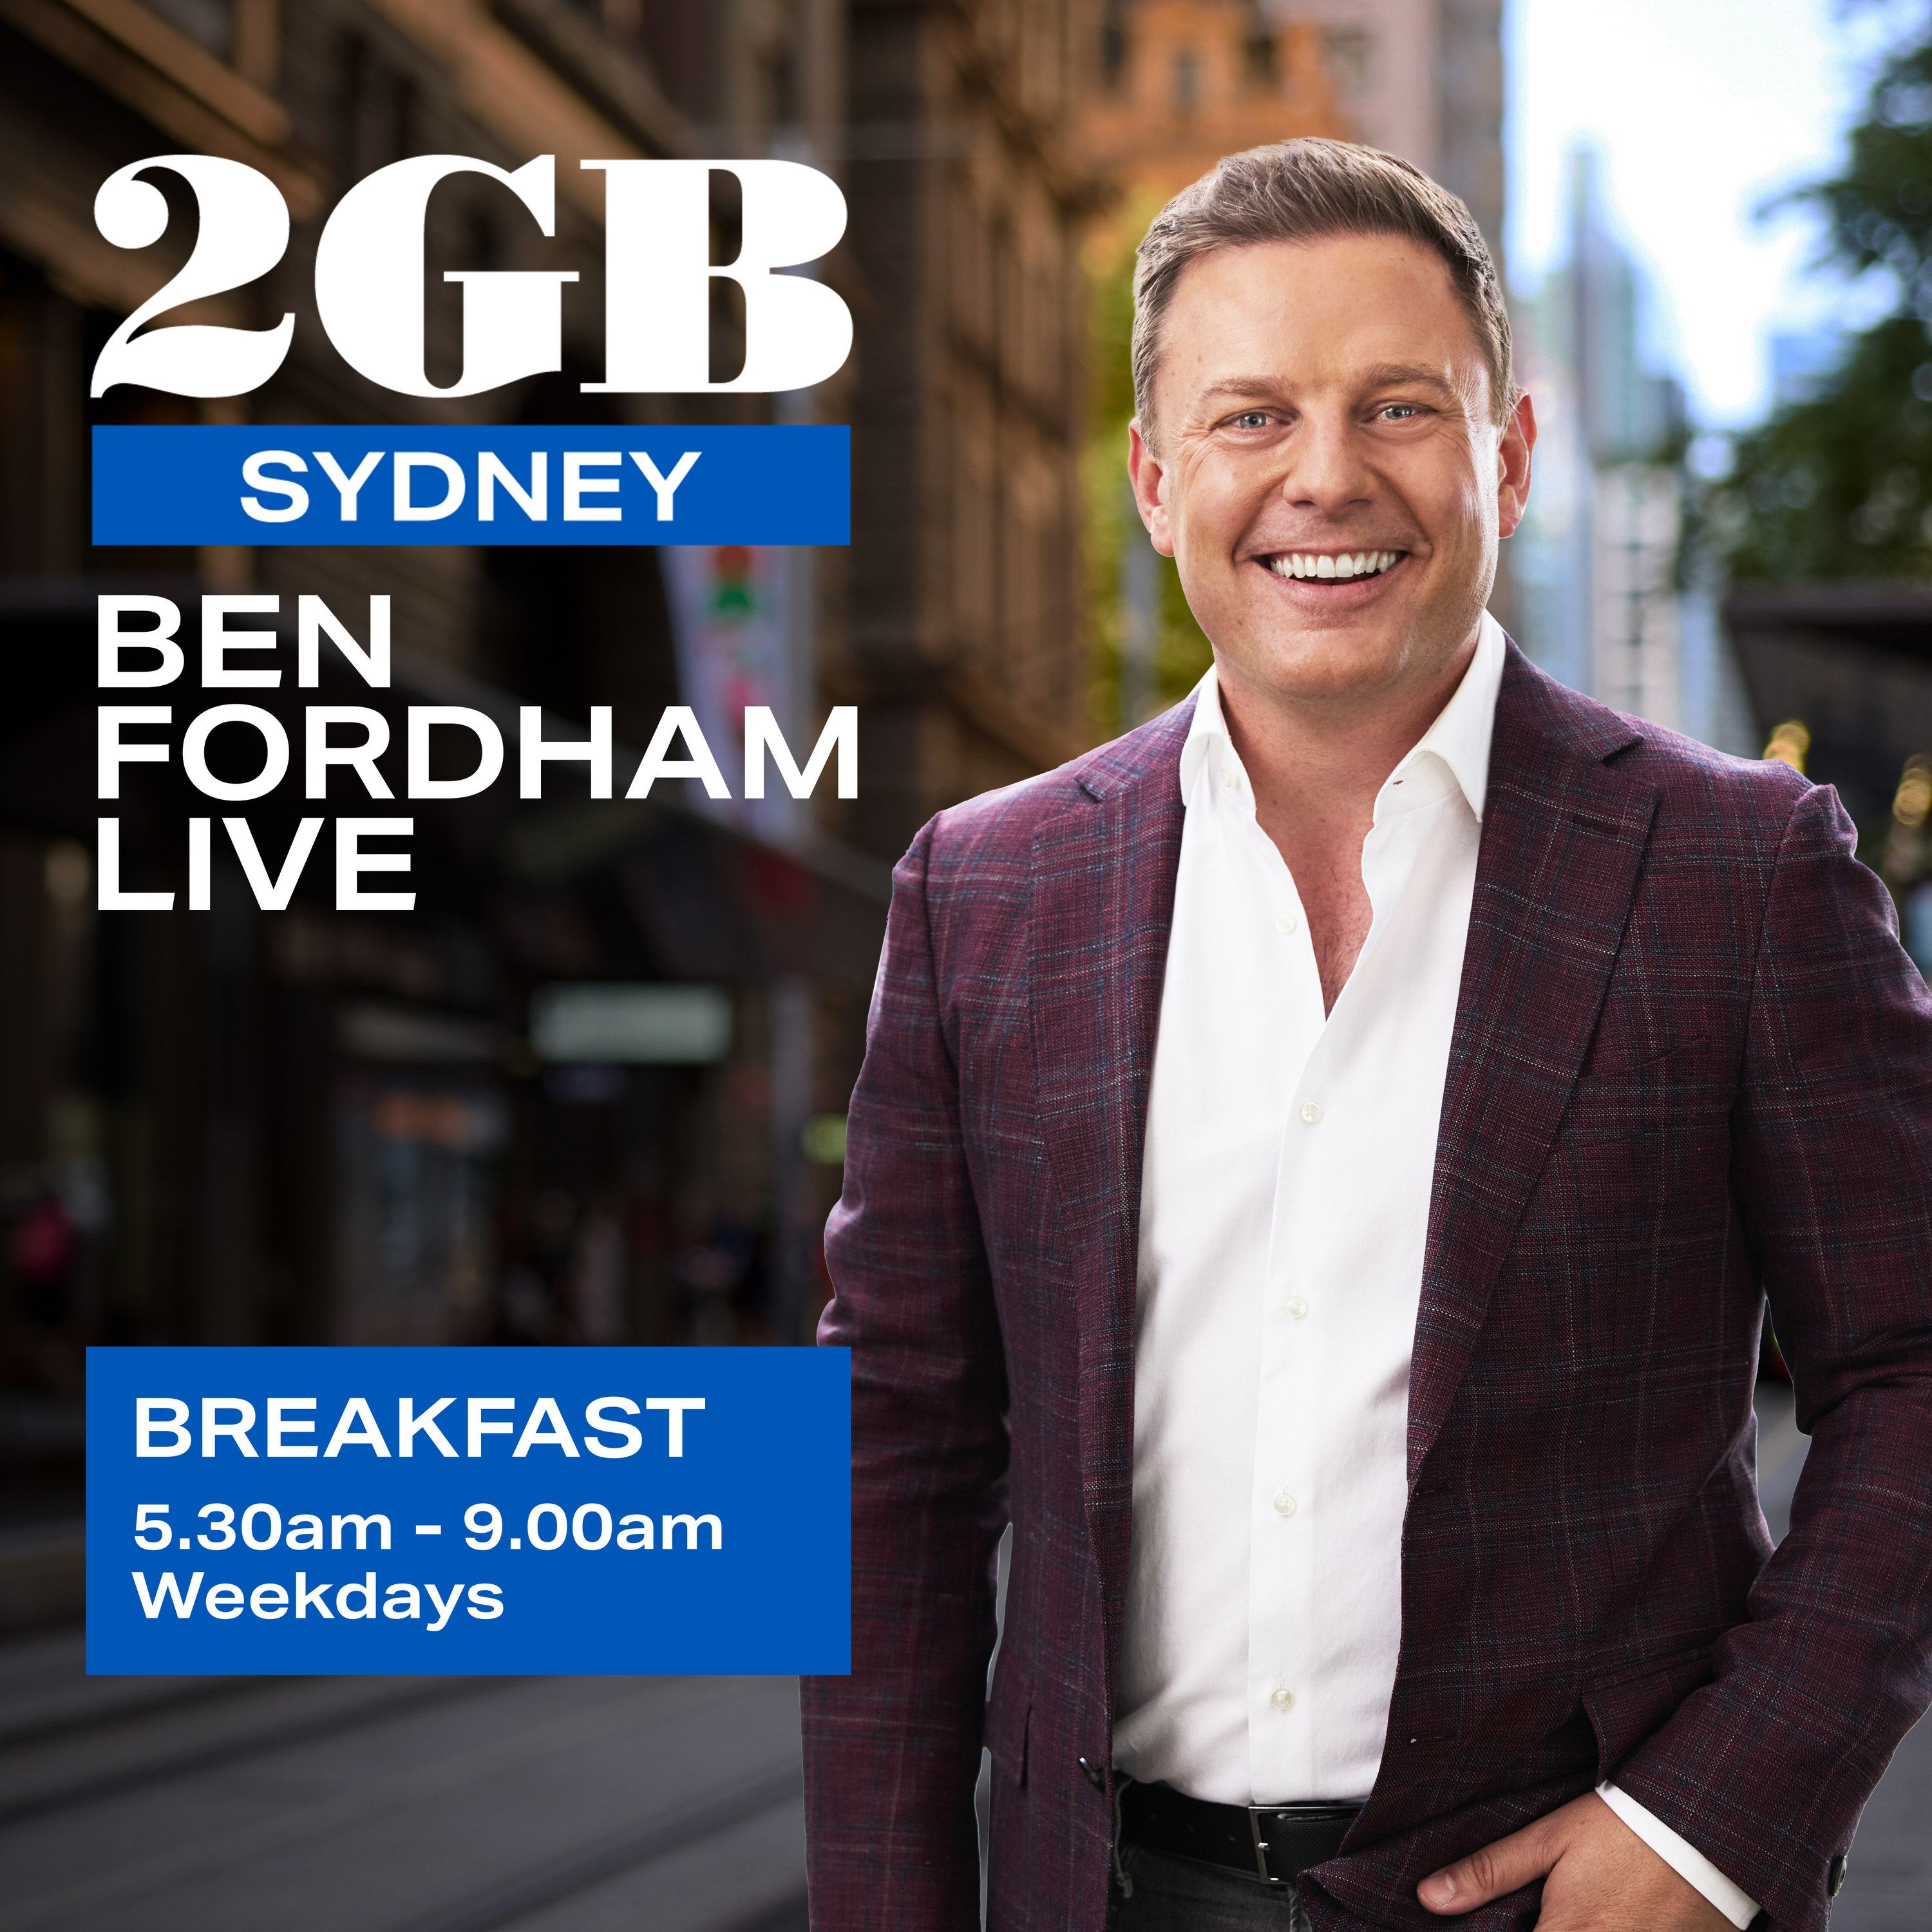 Ben Fordham calls on listeners to support cafe targeted by anti-vaxxer